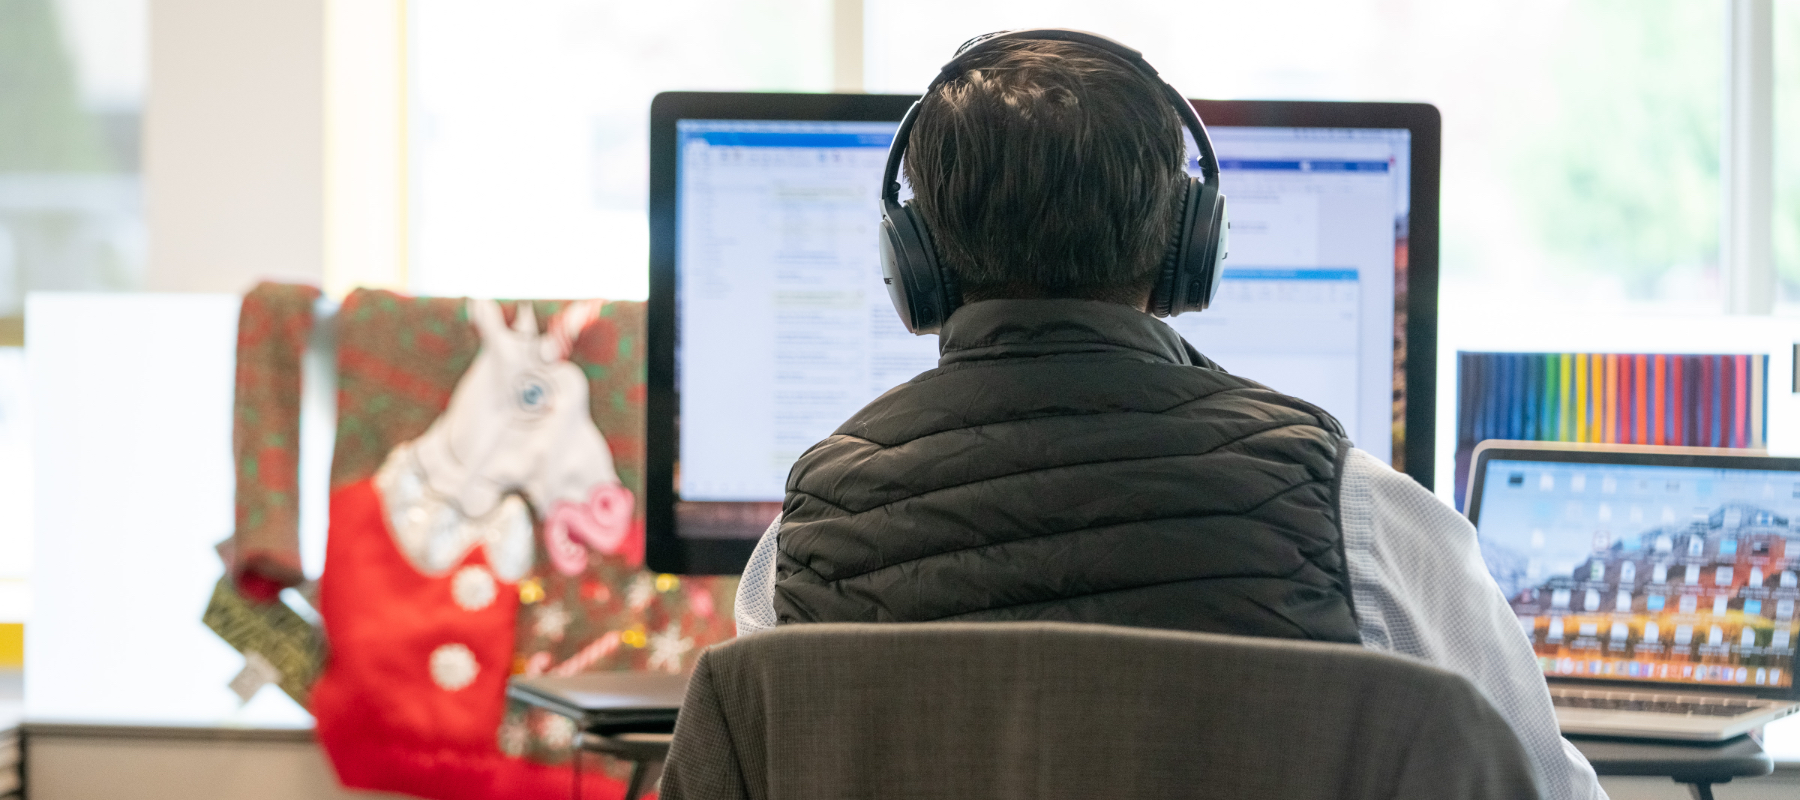 Image of an employee with headphones on sitting at a computer